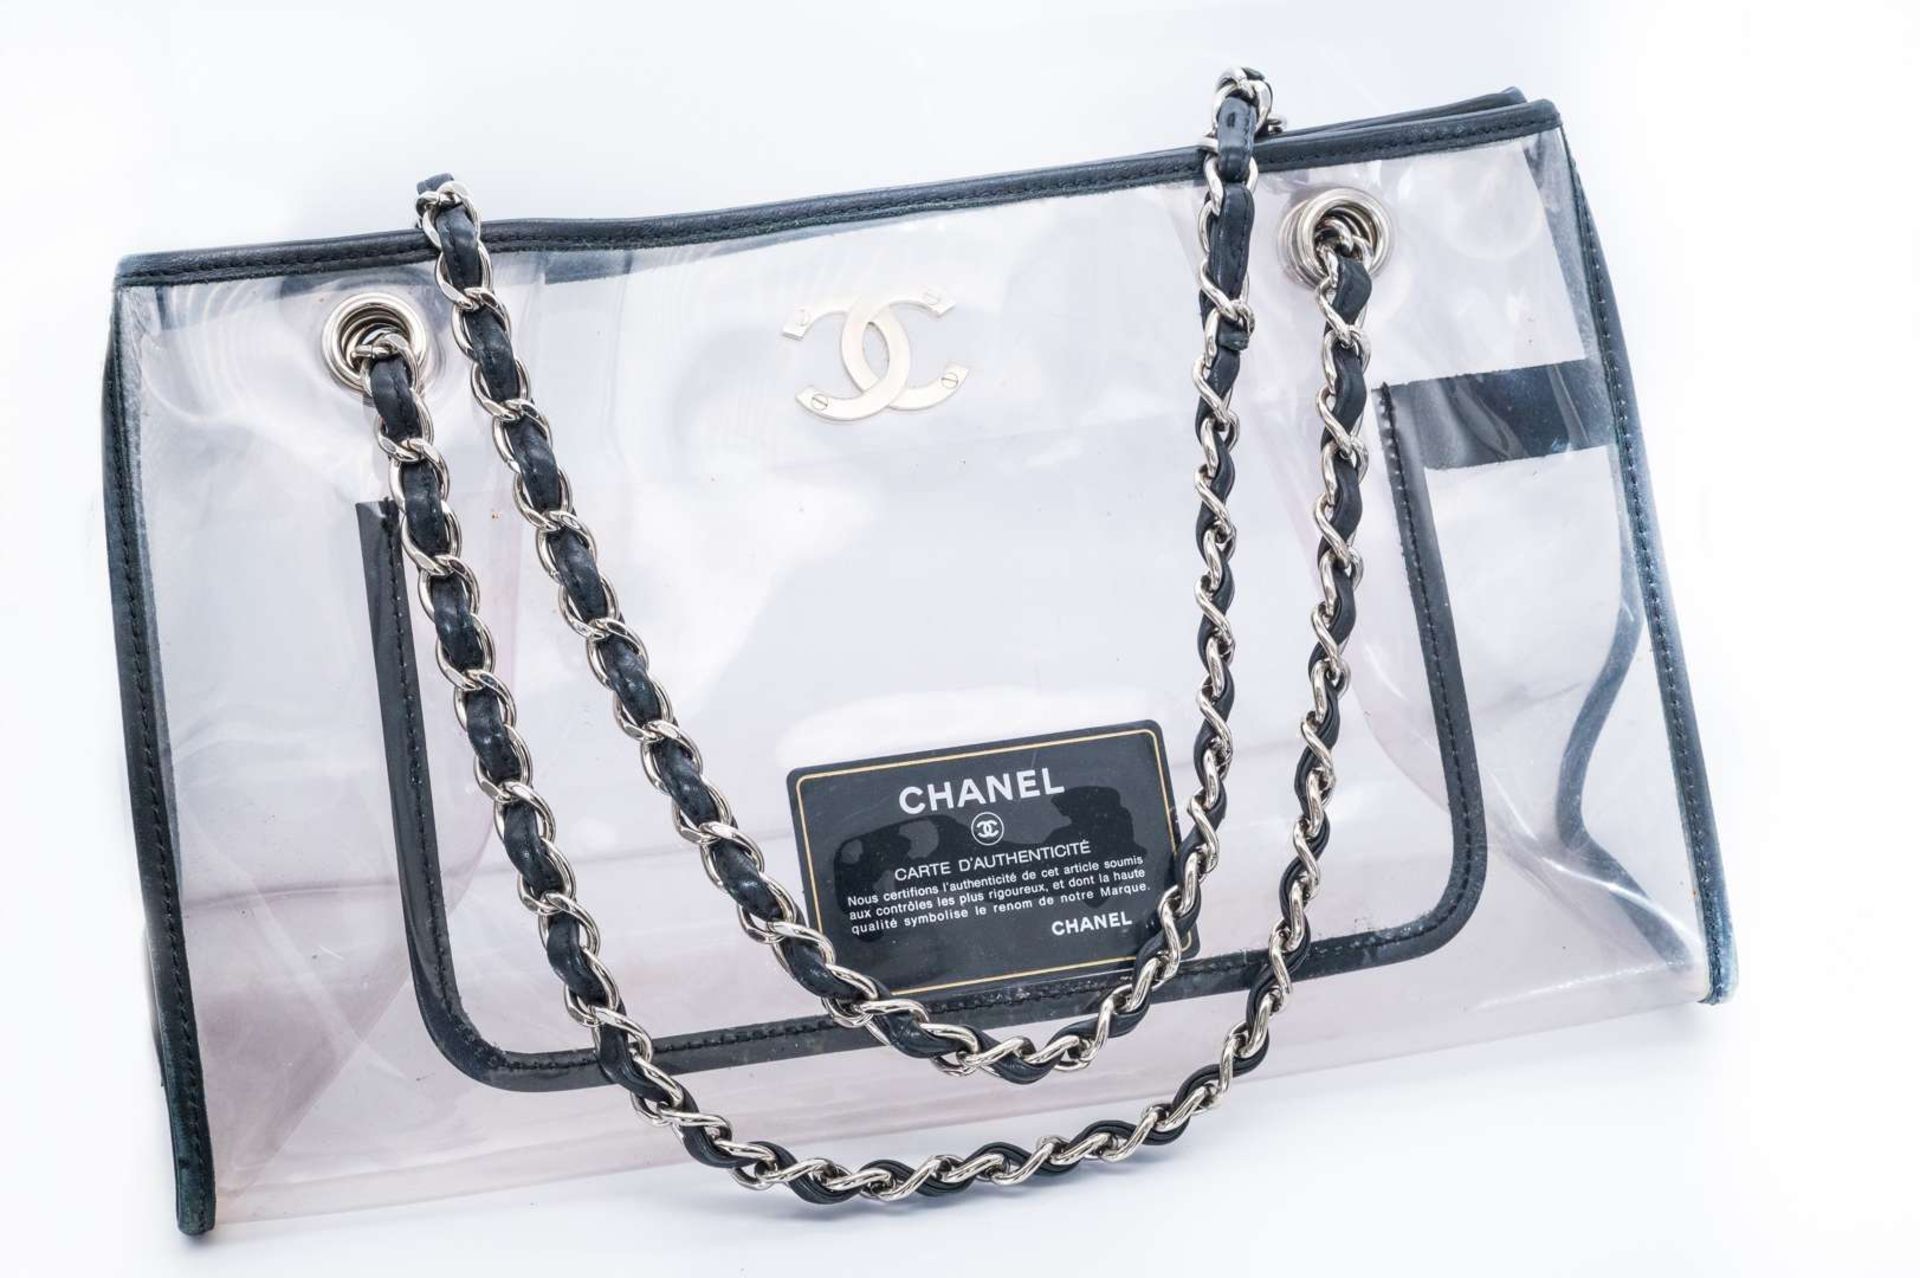 CHANEL, PVC tote bag, with black leather trim and silver curb link chain carry strap. 2006-2008 - Bild 2 aus 4